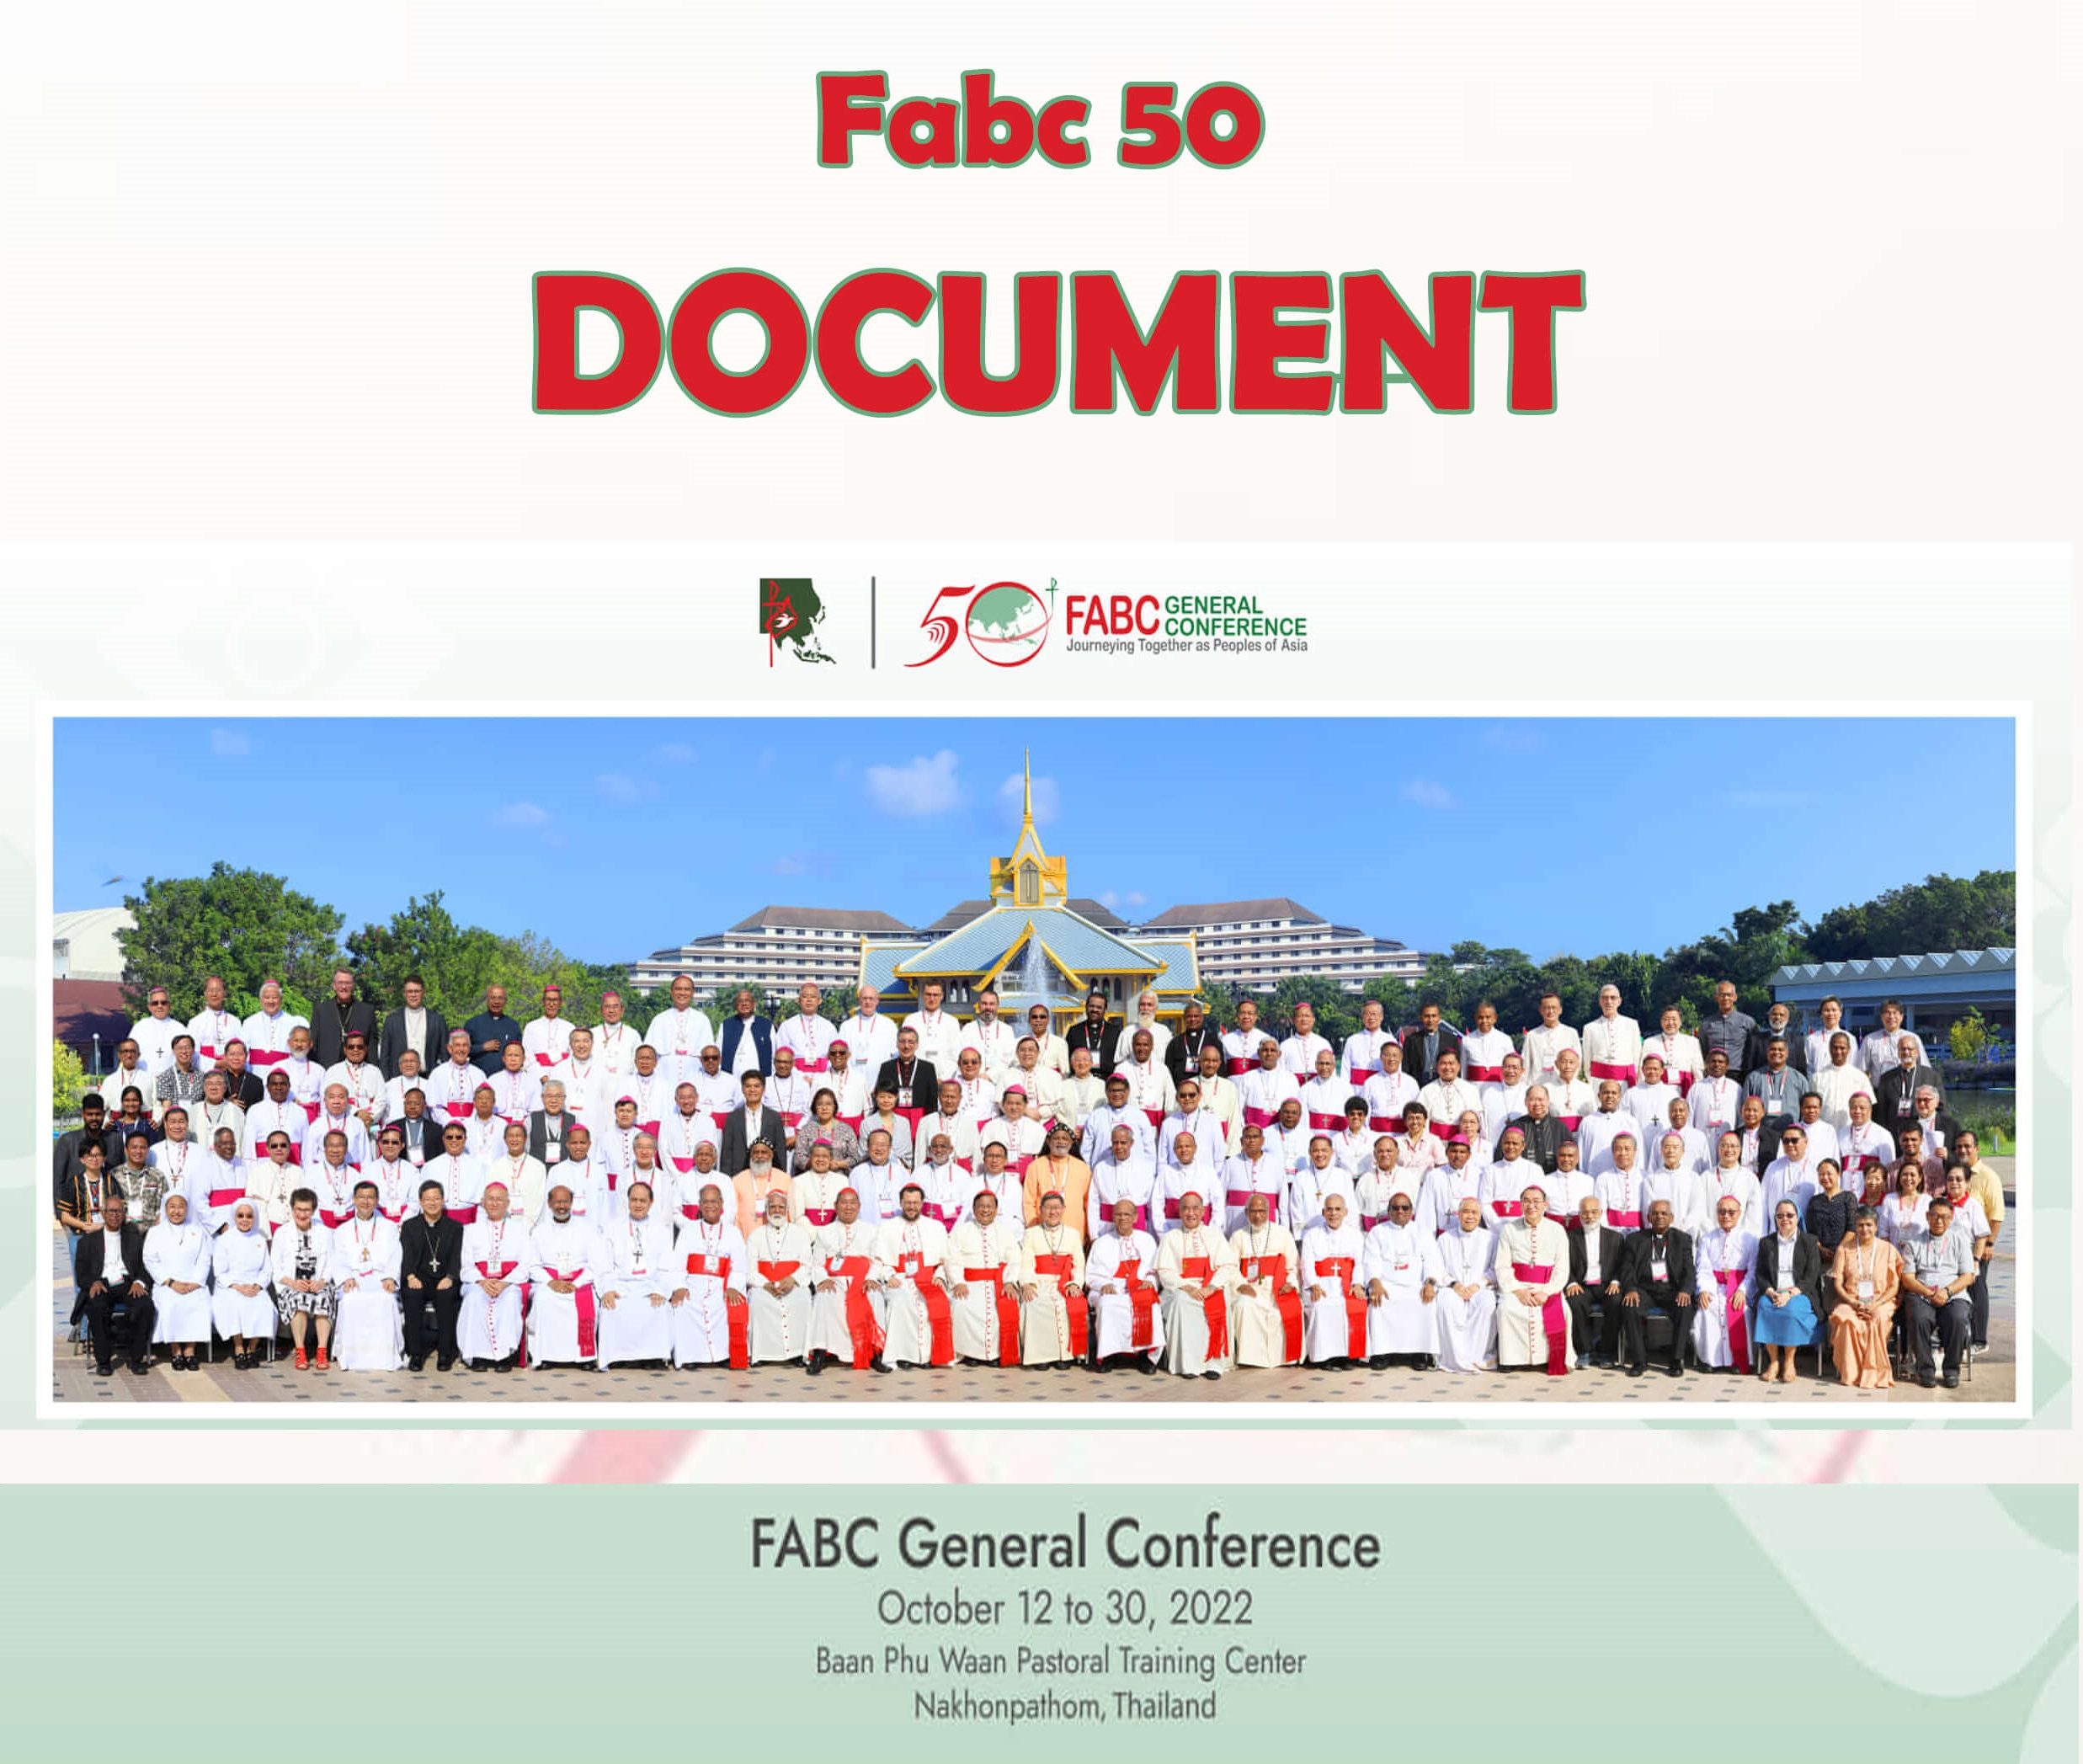 As for the tone, the FABC document tends to sermonize rather than provide guiding principles and orientations, even less concrete action plans.